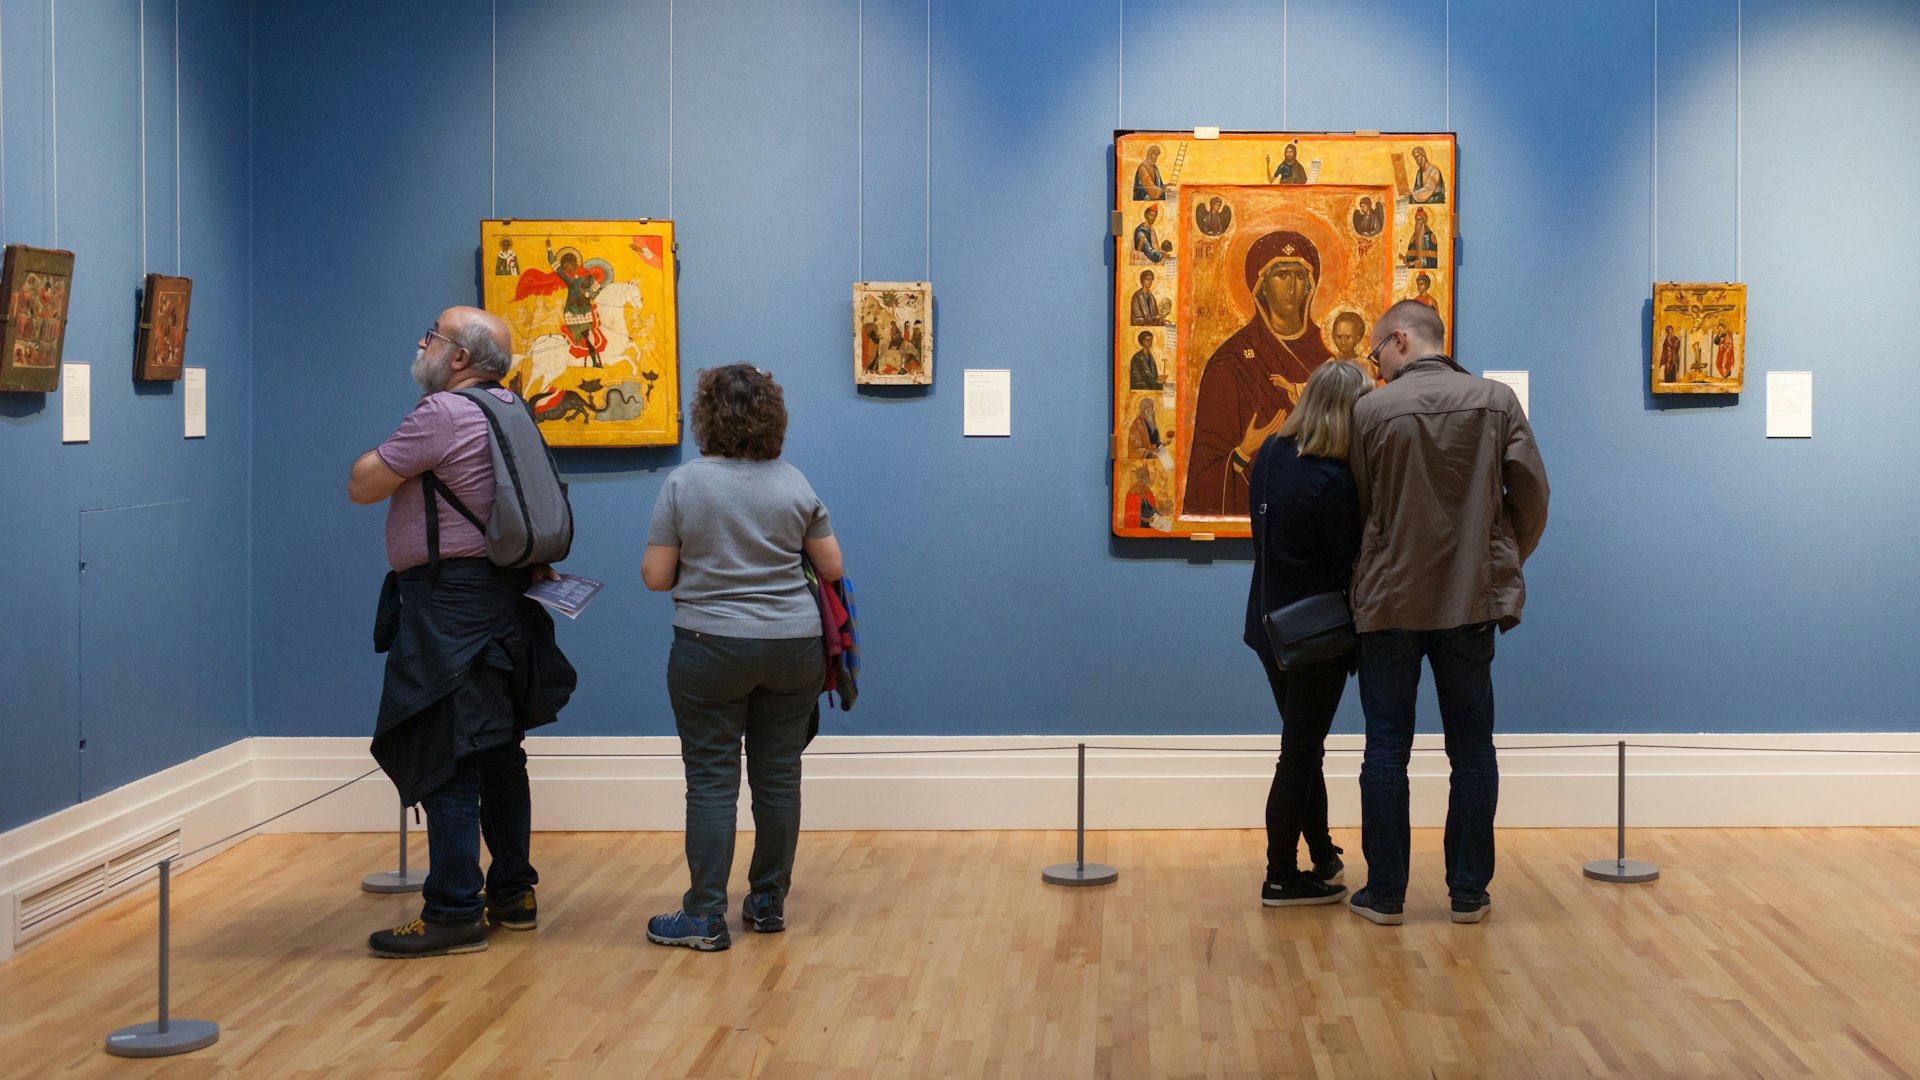 A group of people looking at different paintings inside the National Gallery of Ireland, Dublin, Ireland